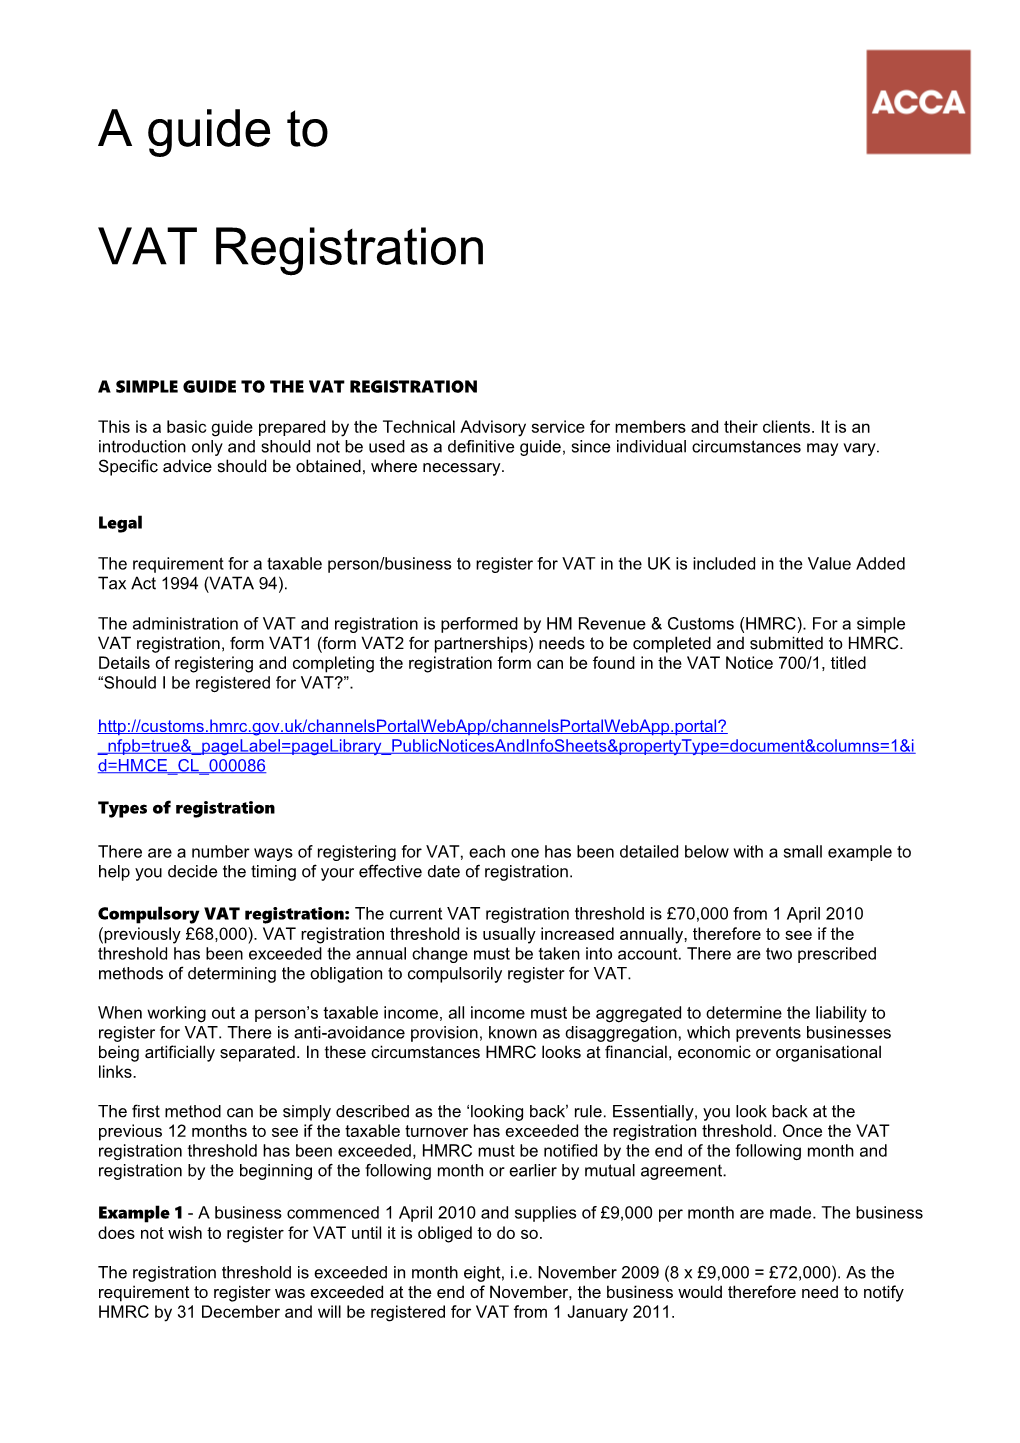 A Simple Guide to the Vat Registration